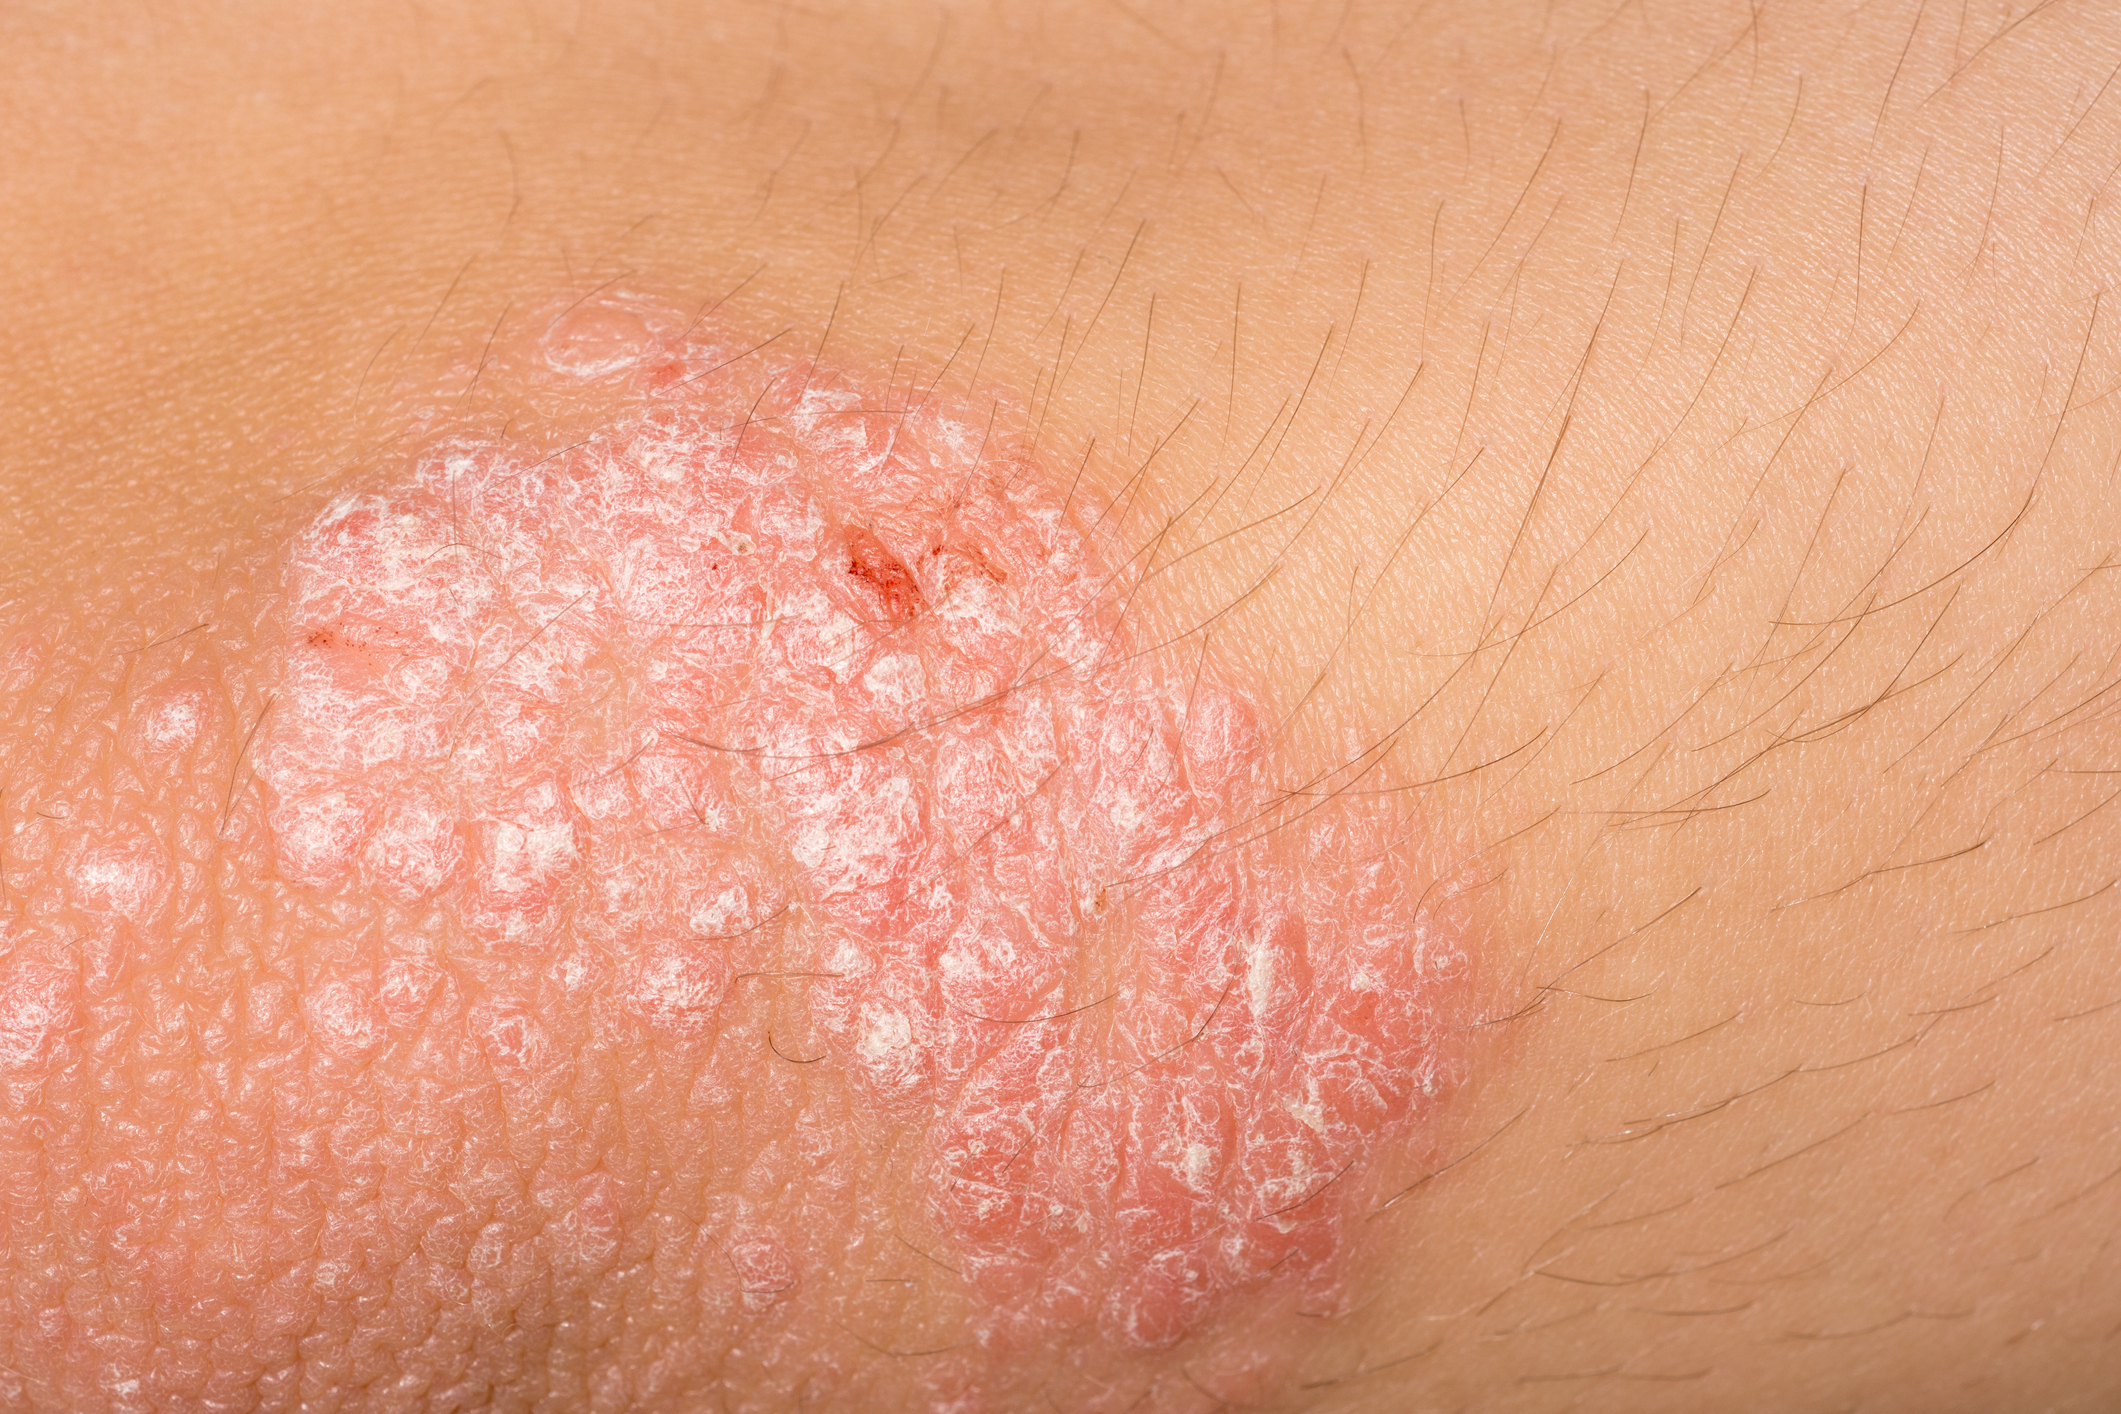 is psoriasis contagious by touch systemic complications of psoriasis